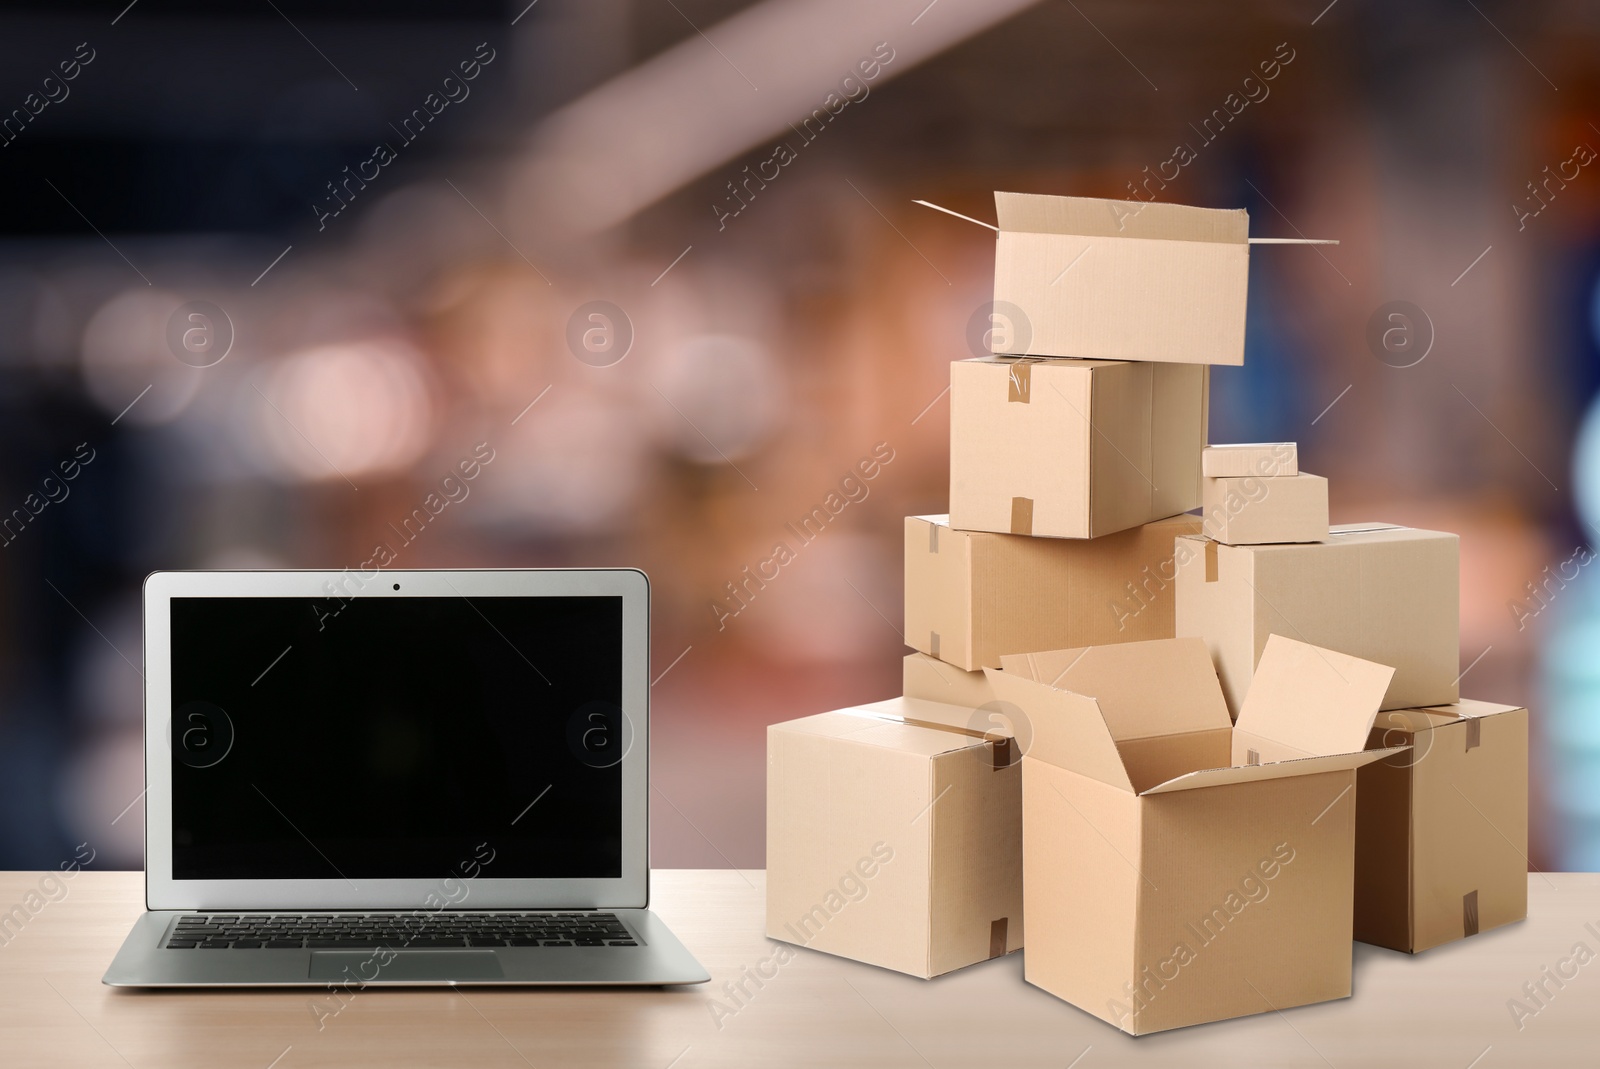 Image of Online selling. Laptop and parcels on table in store